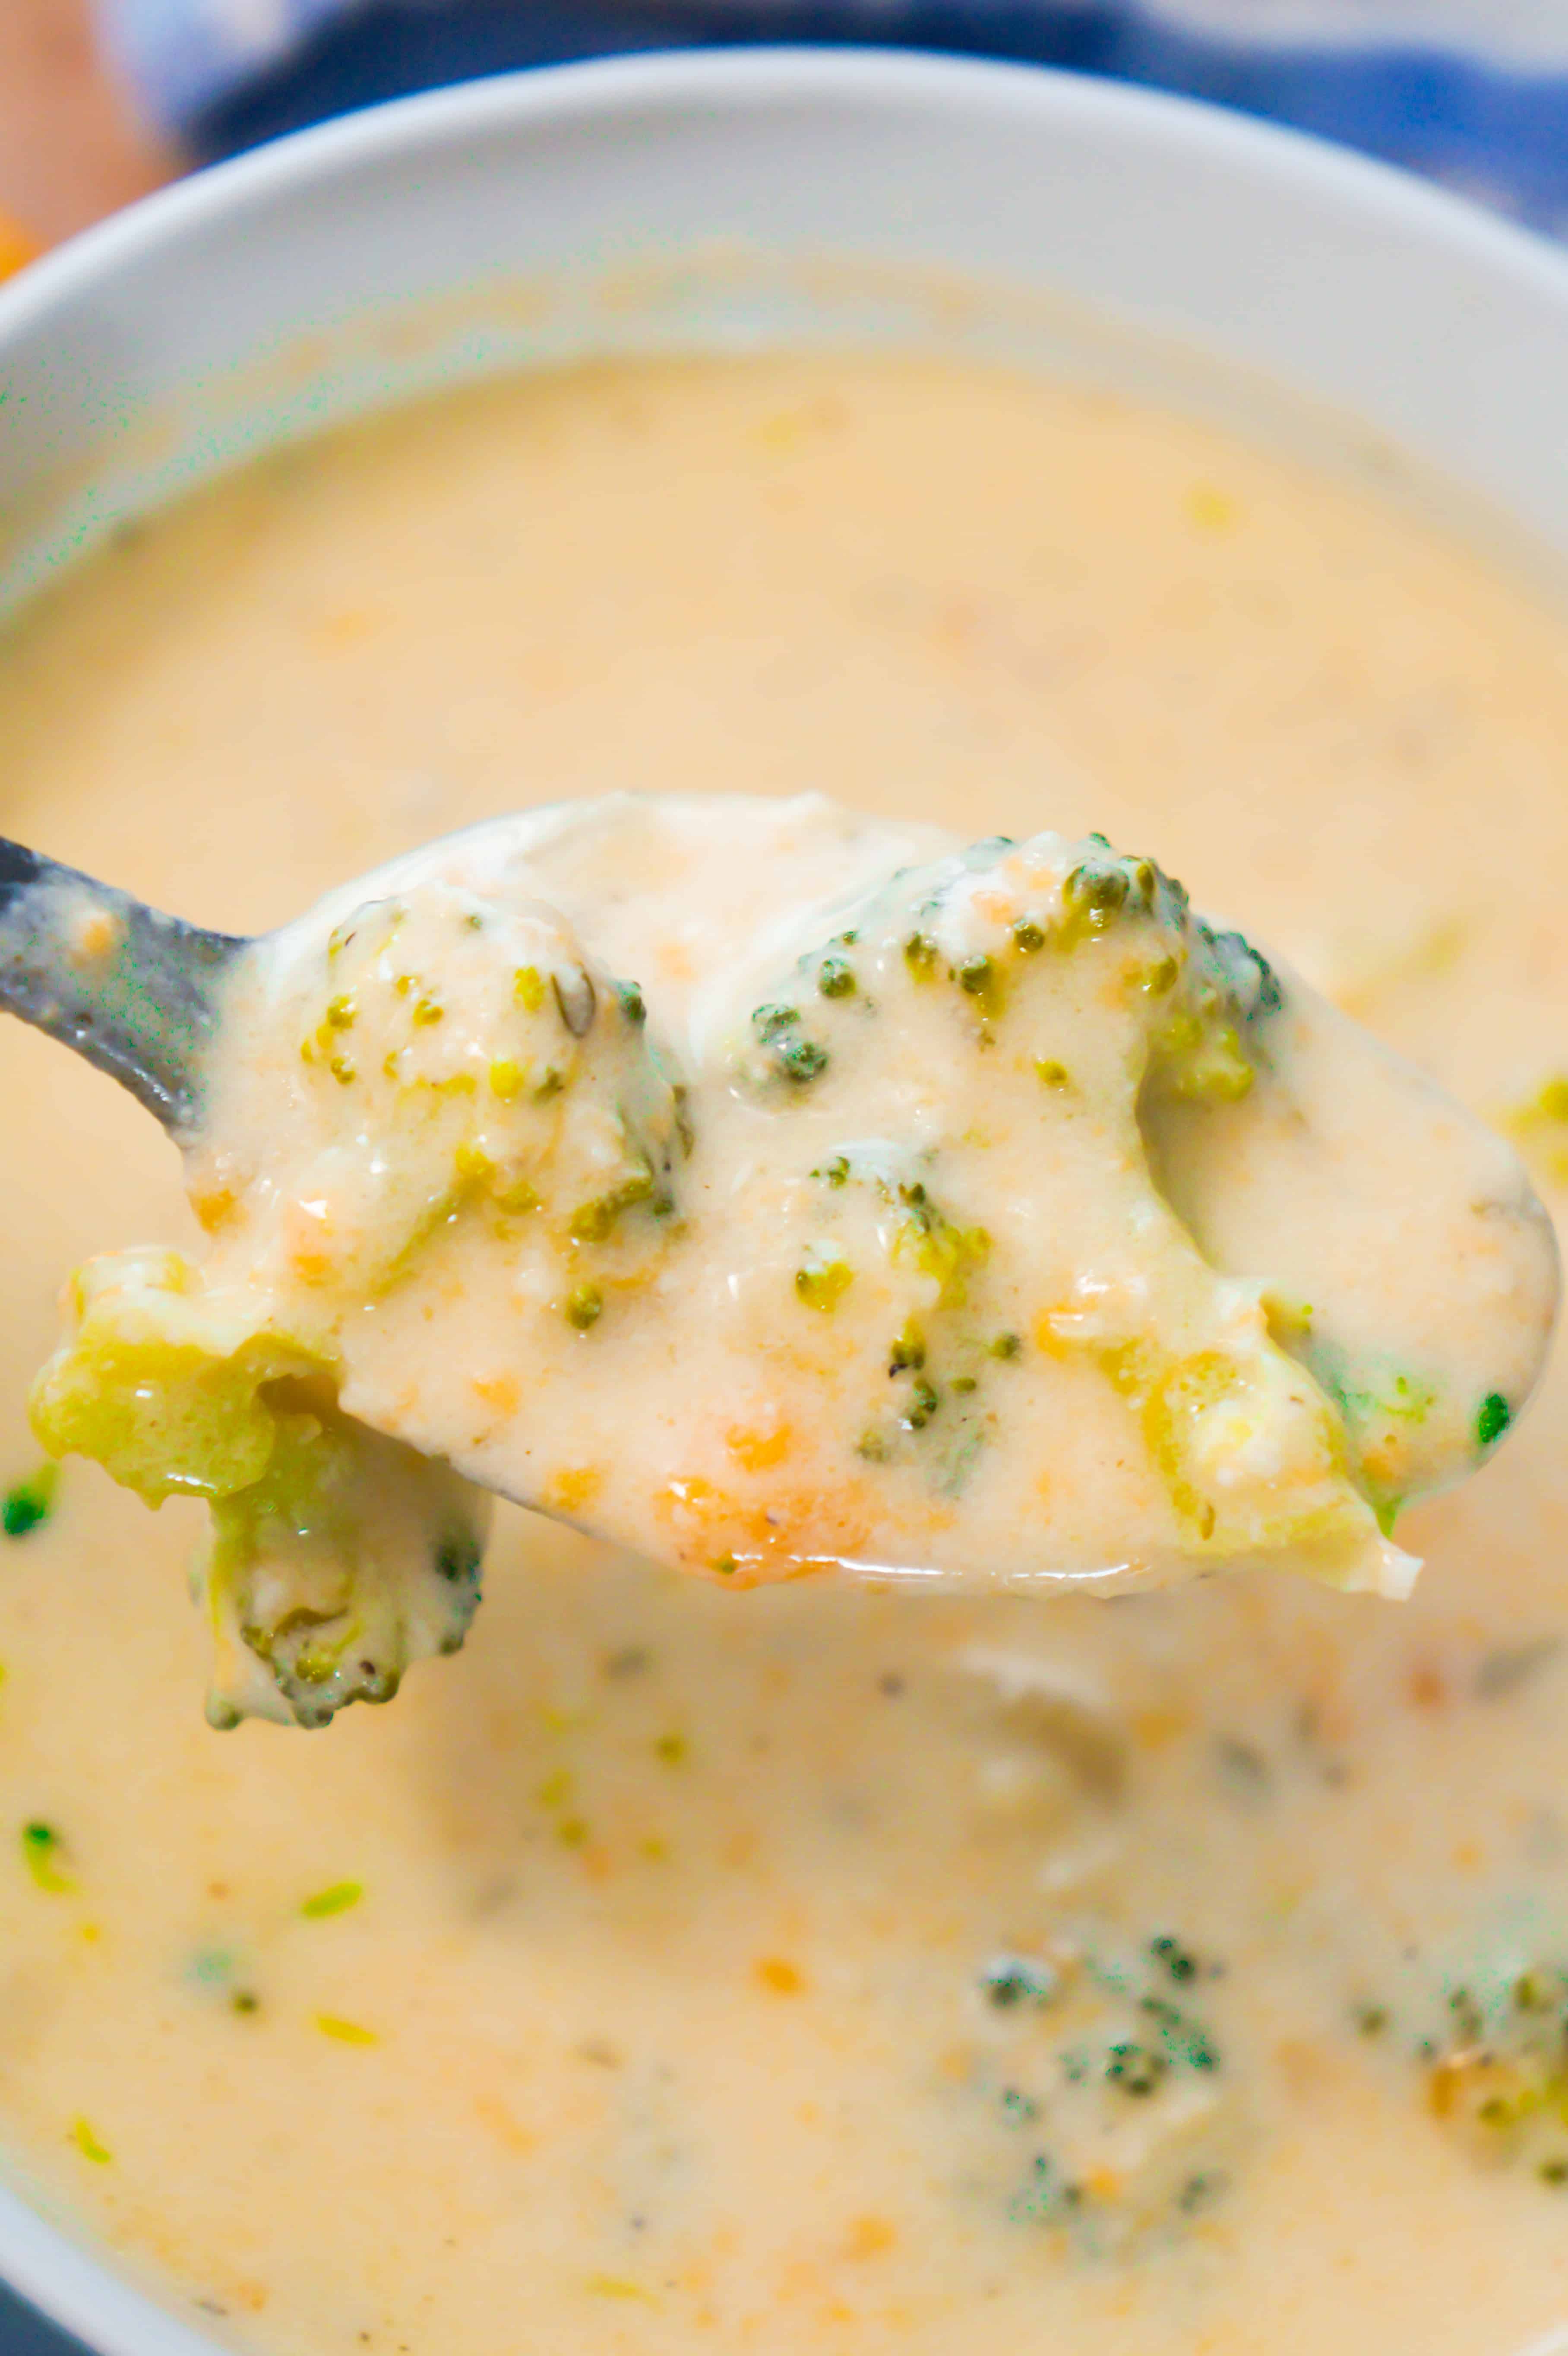 Broccoli cheddar soup is the perfect cold weather recipe.